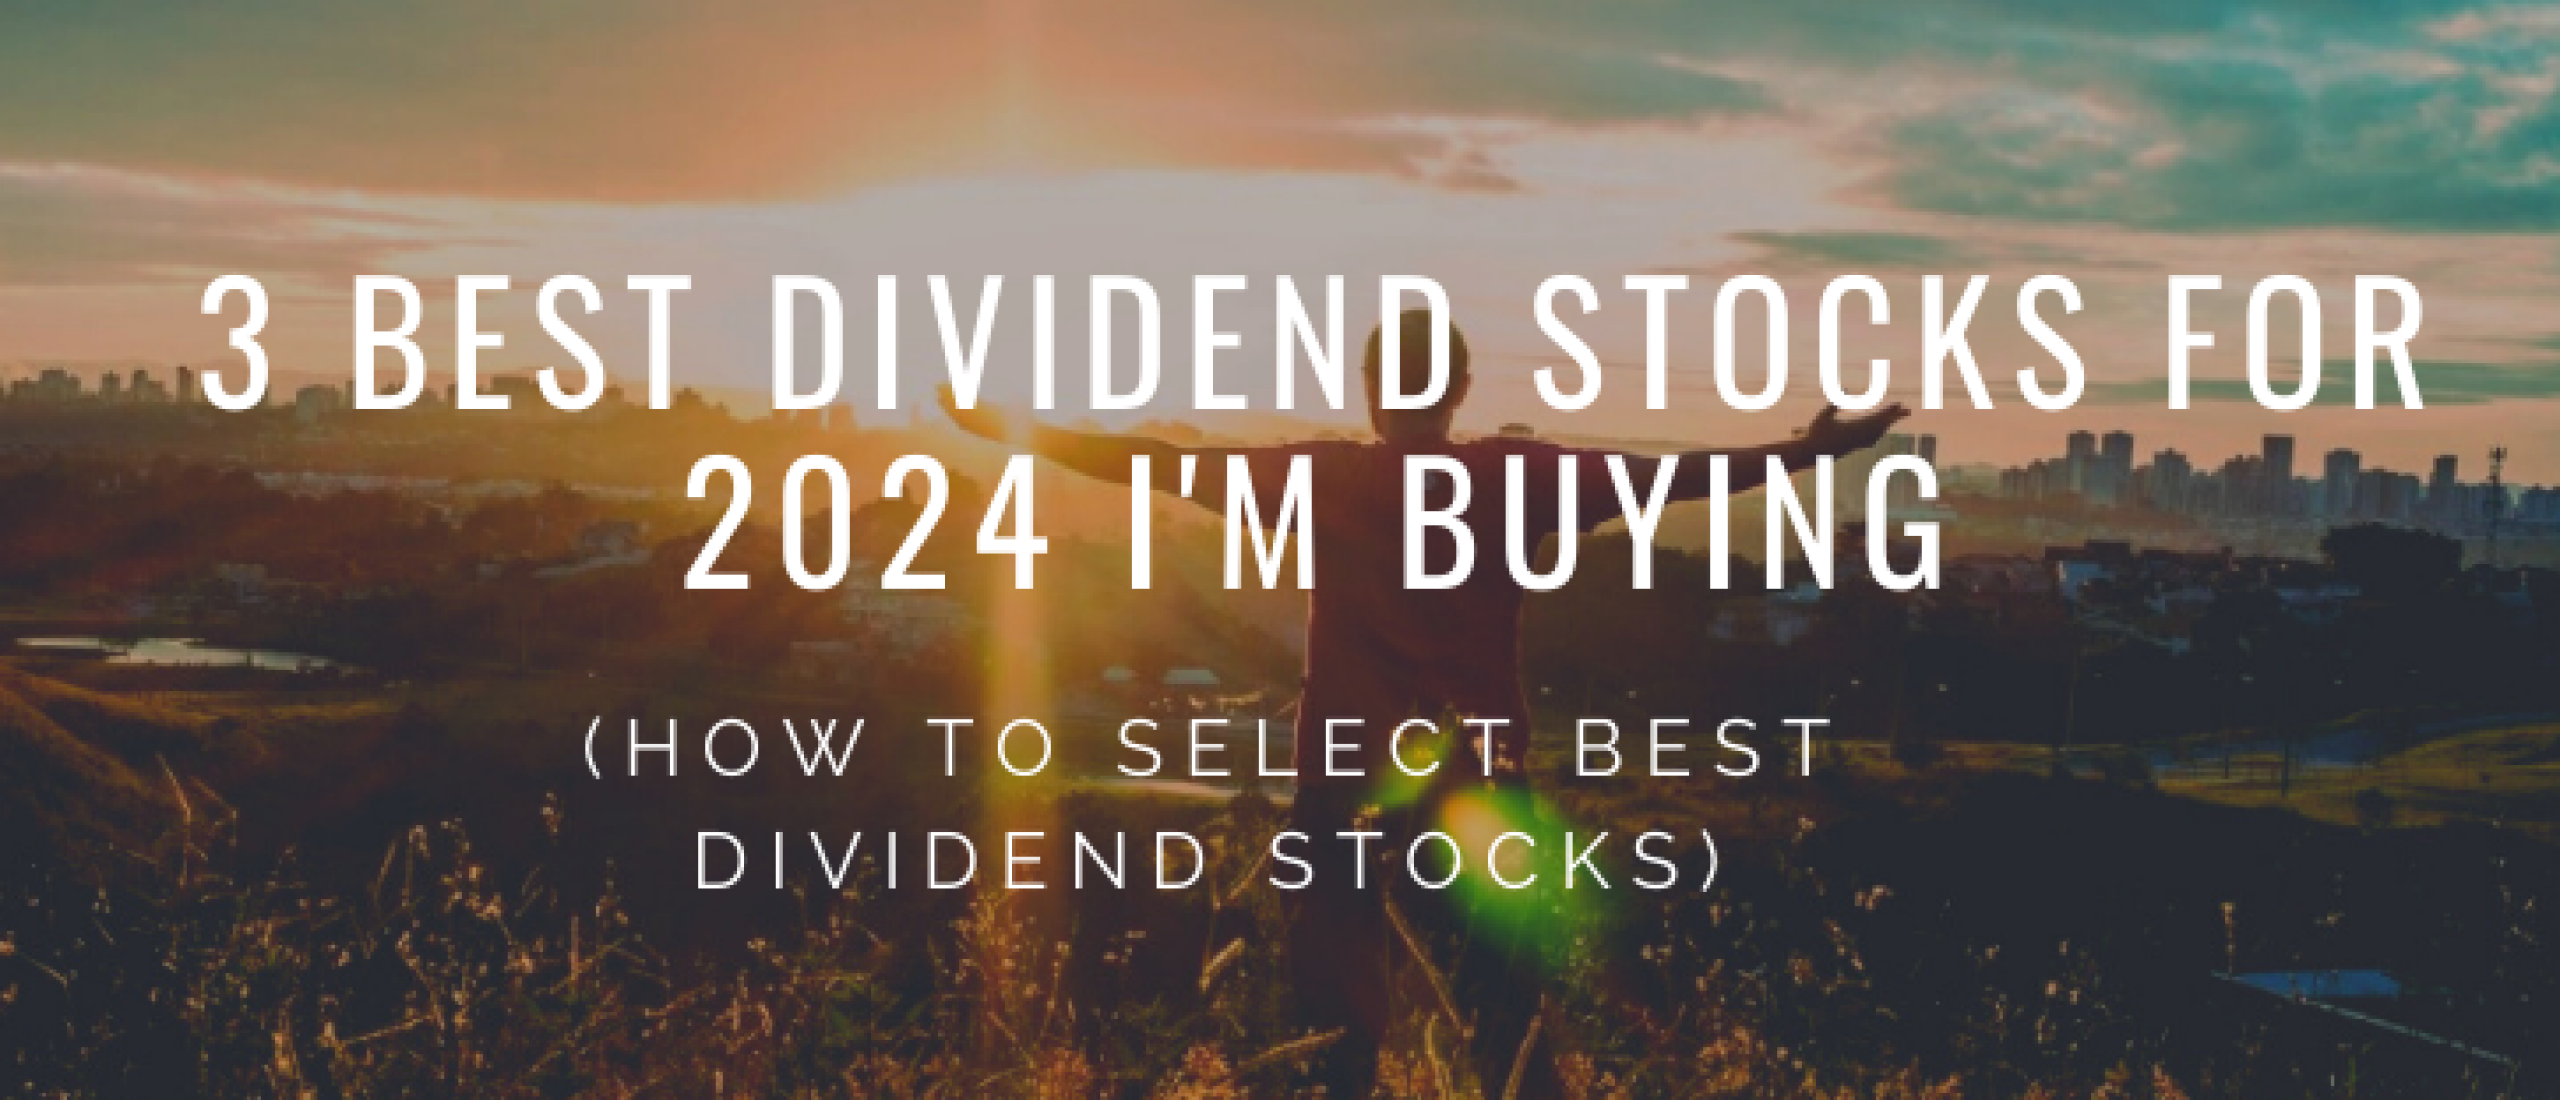 3 Best Dividend Stocks for 2024 I'm Buying | Happy Investors